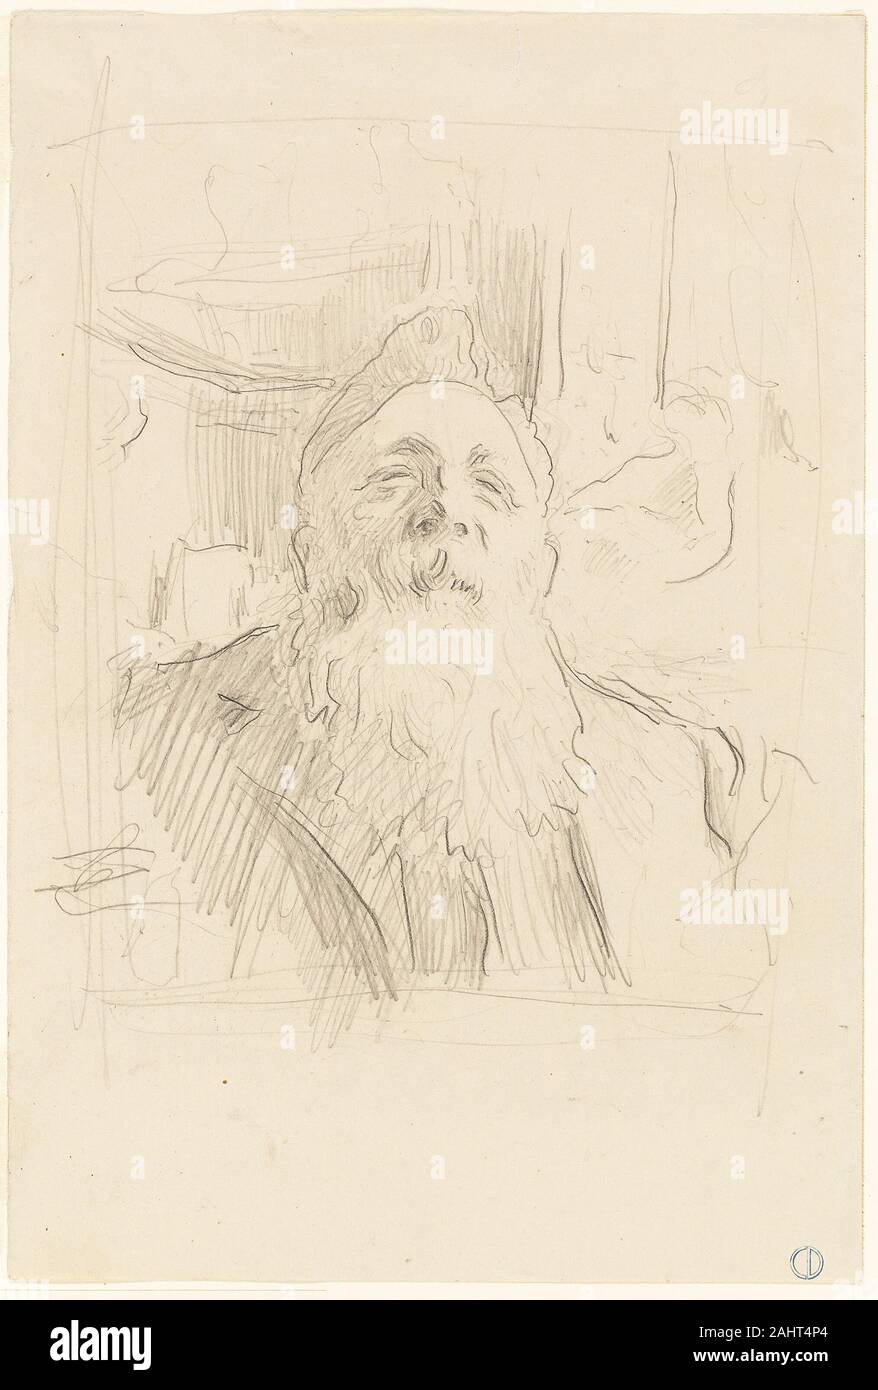 Anders Zorn. Study. 1906. Sweden. Graphite on ivory wove paper Stock Photo